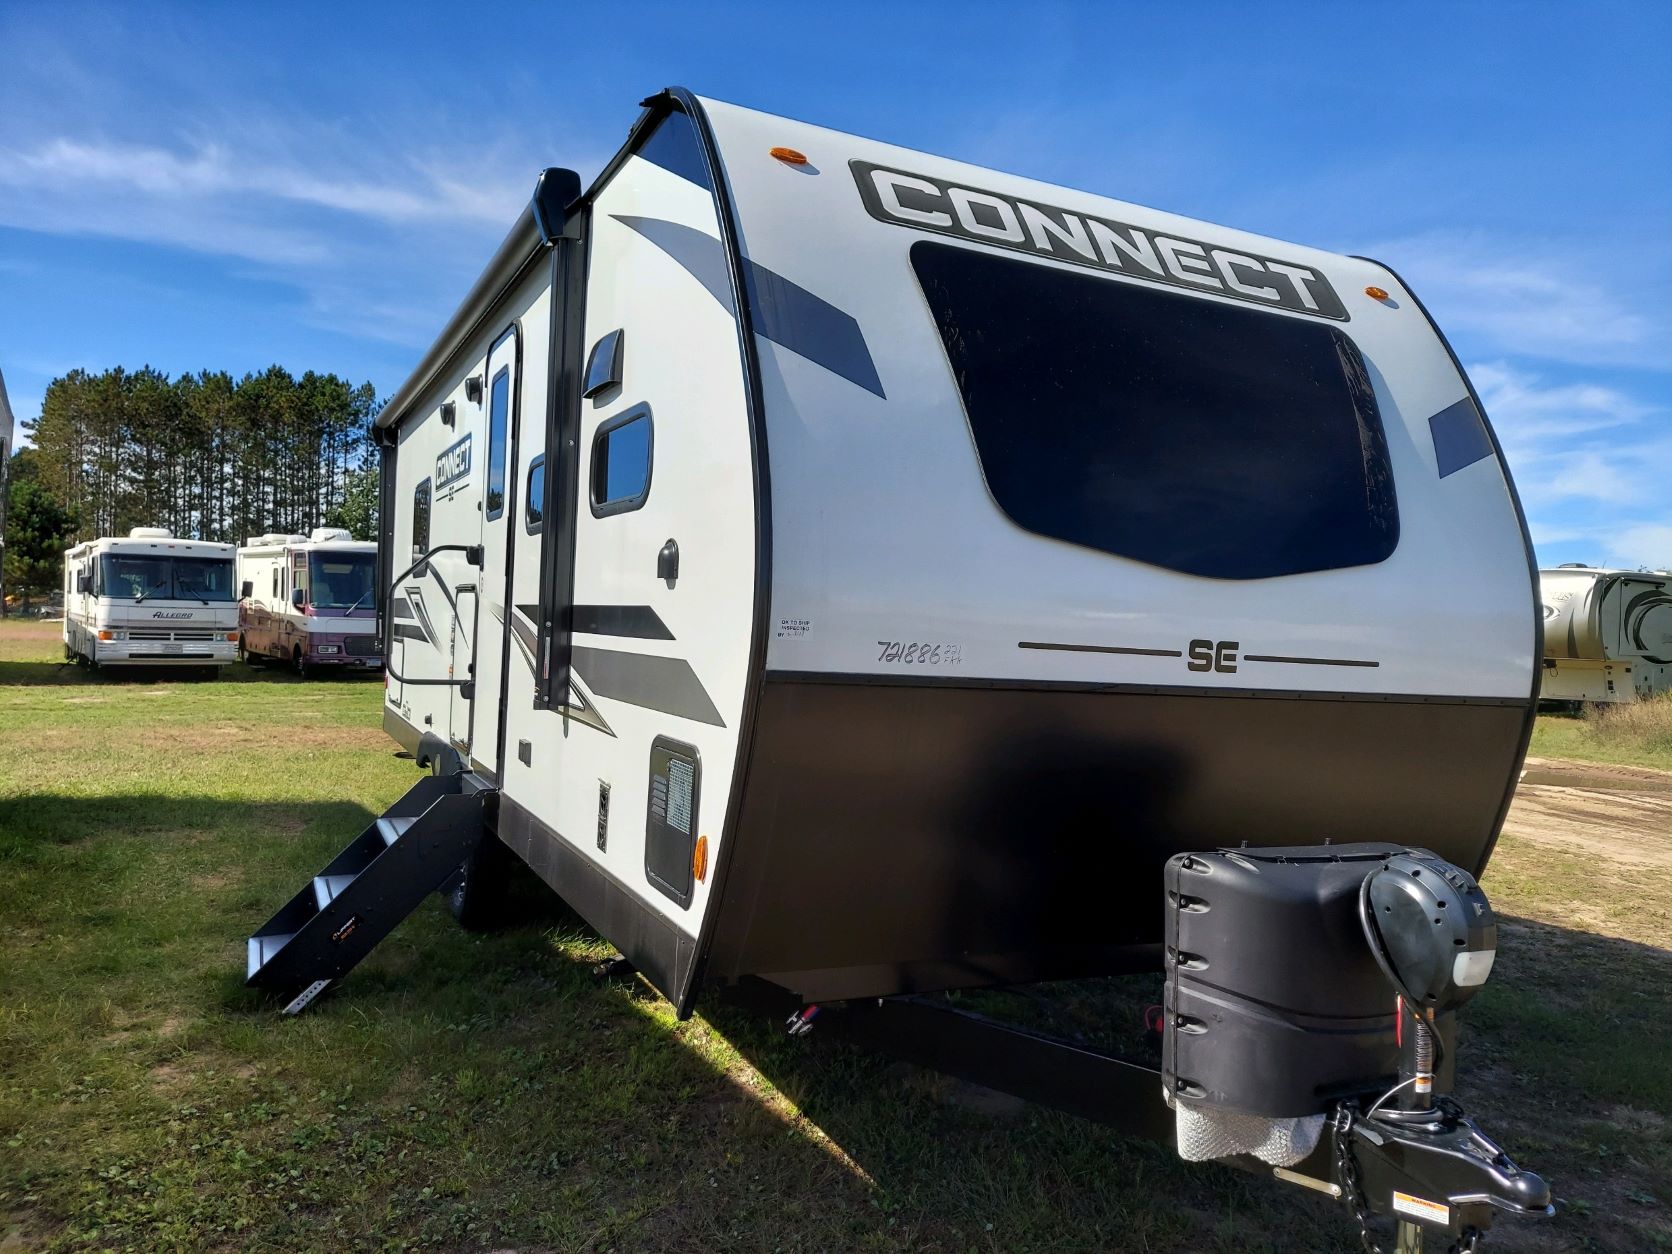 who manufactures connect travel trailers